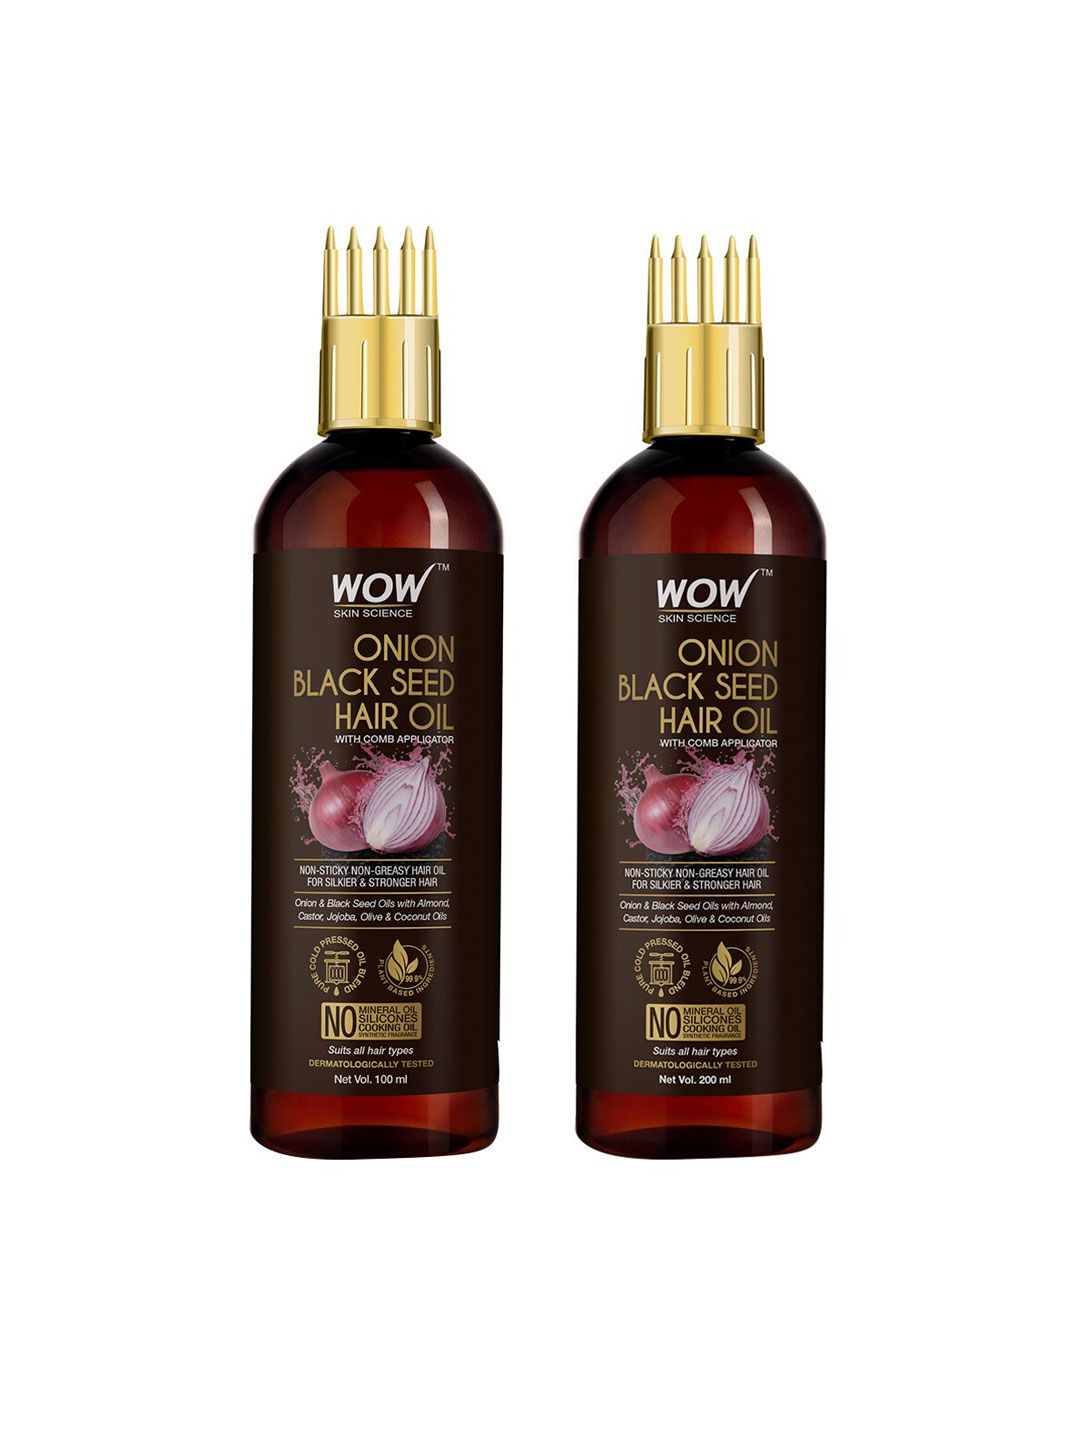 WOW SKIN SCIENCE Set of 2 Onion Black Seed Hair Oil - With Comb Applicator Price in India